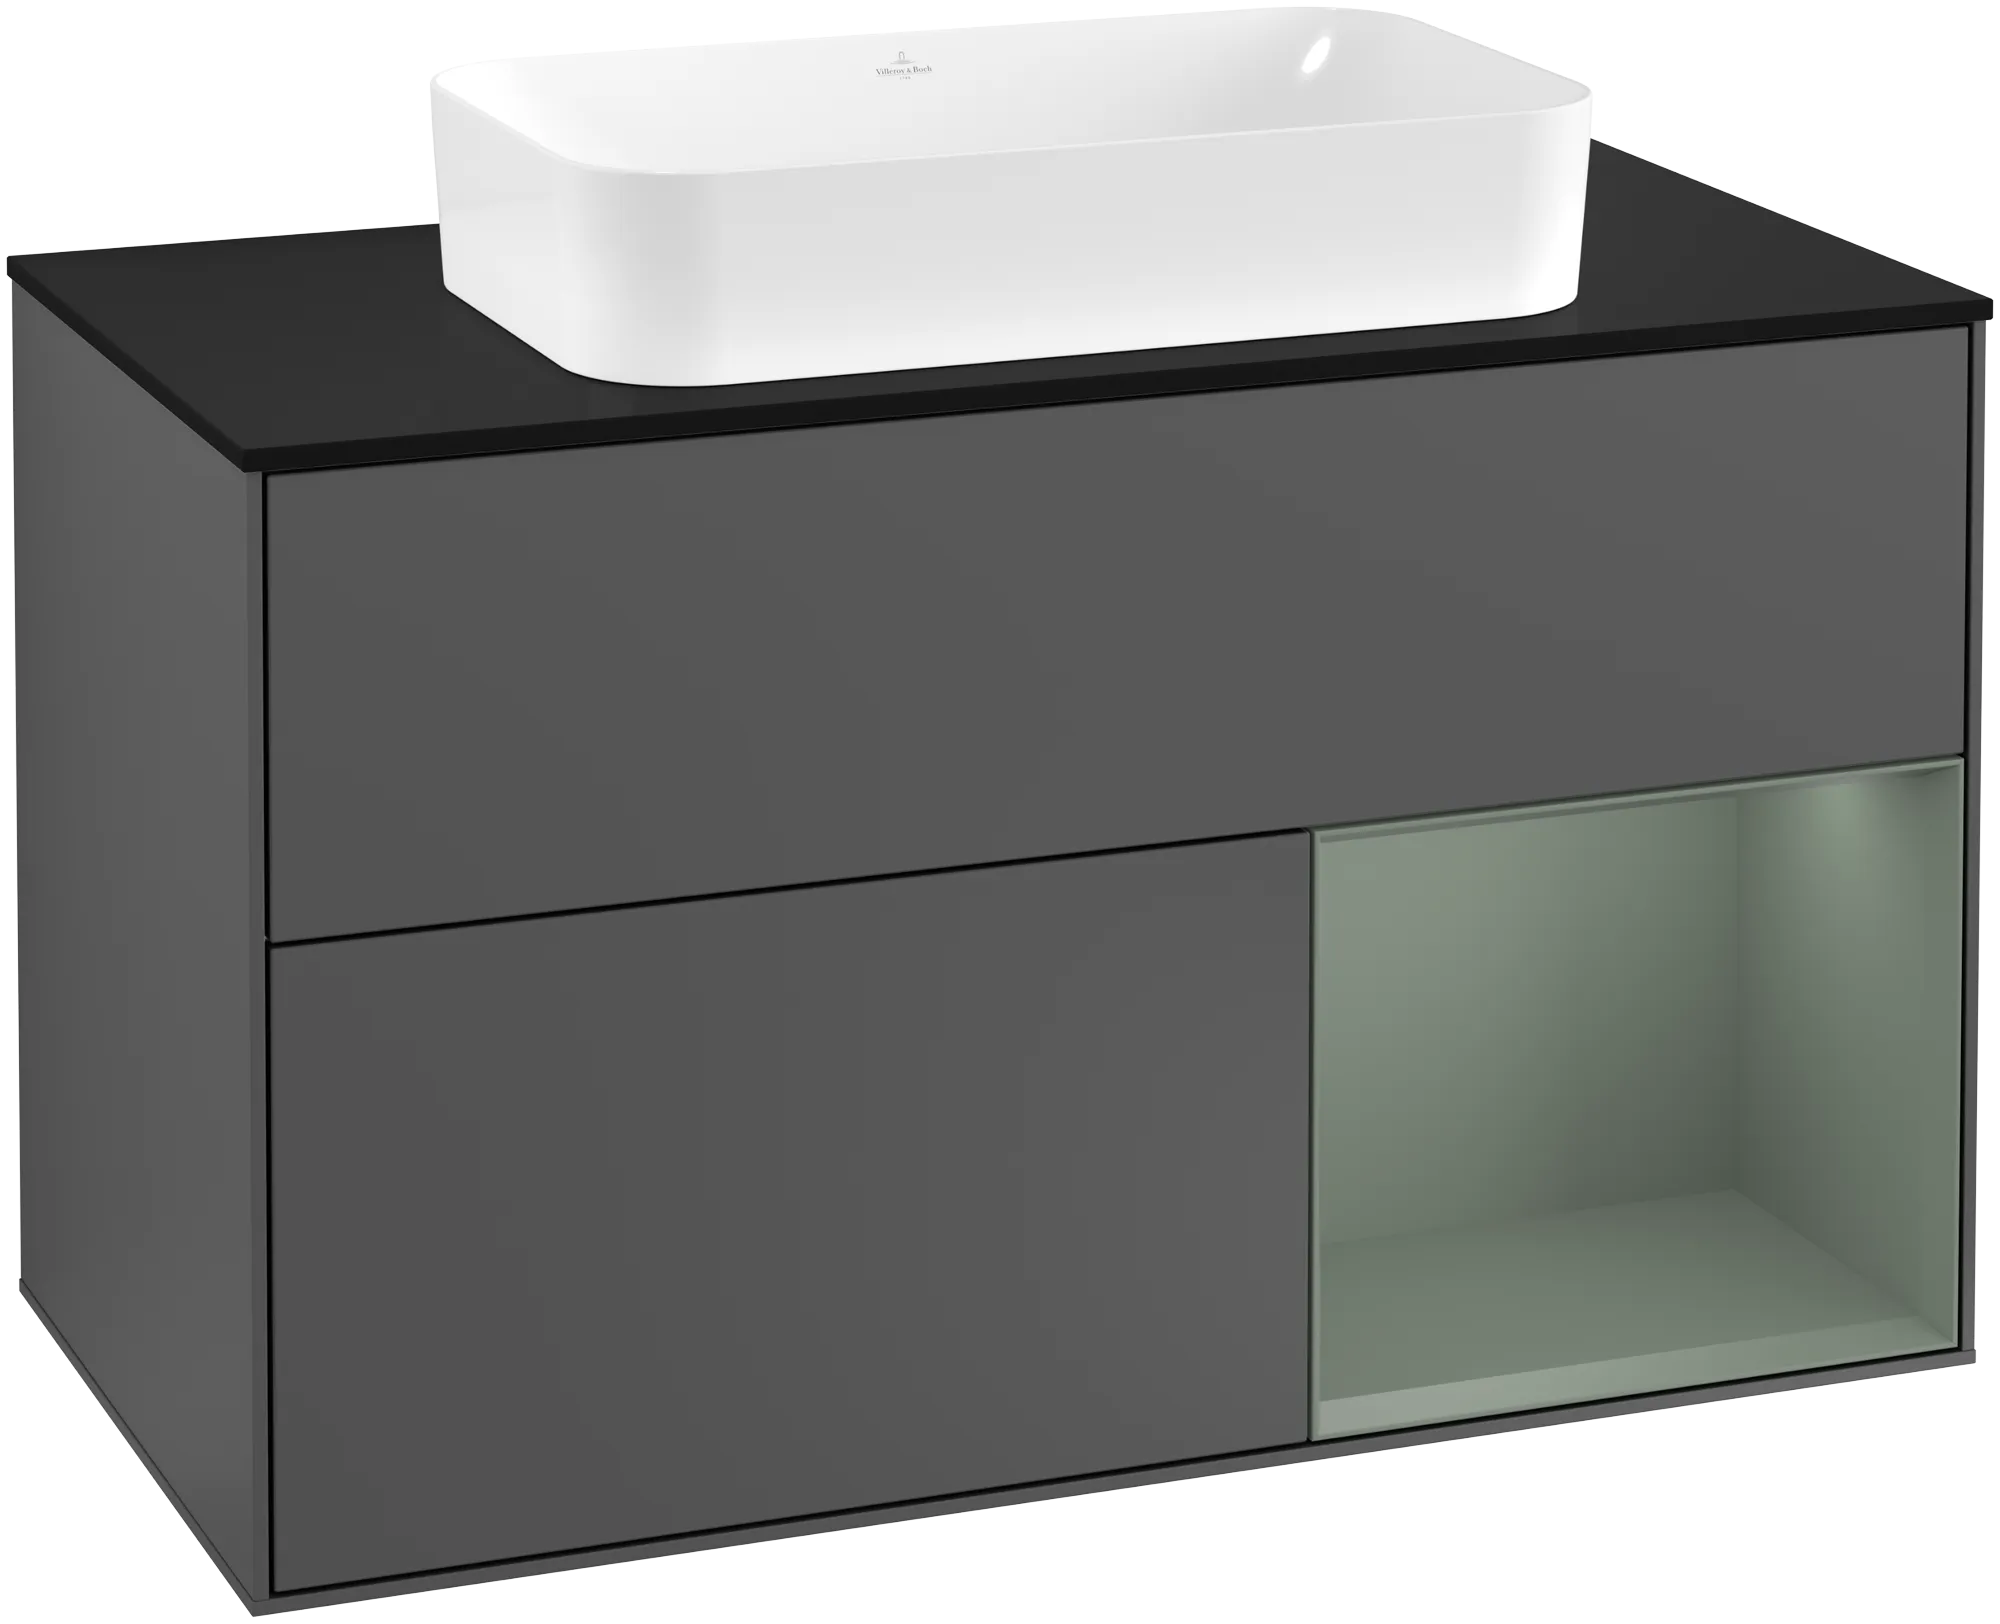 Picture of VILLEROY BOCH Finion Vanity unit, with lighting, 2 pull-out compartments, 1000 x 603 x 501 mm, Anthracite Matt Lacquer / Olive Matt Lacquer / Glass Black Matt #G252GMGK